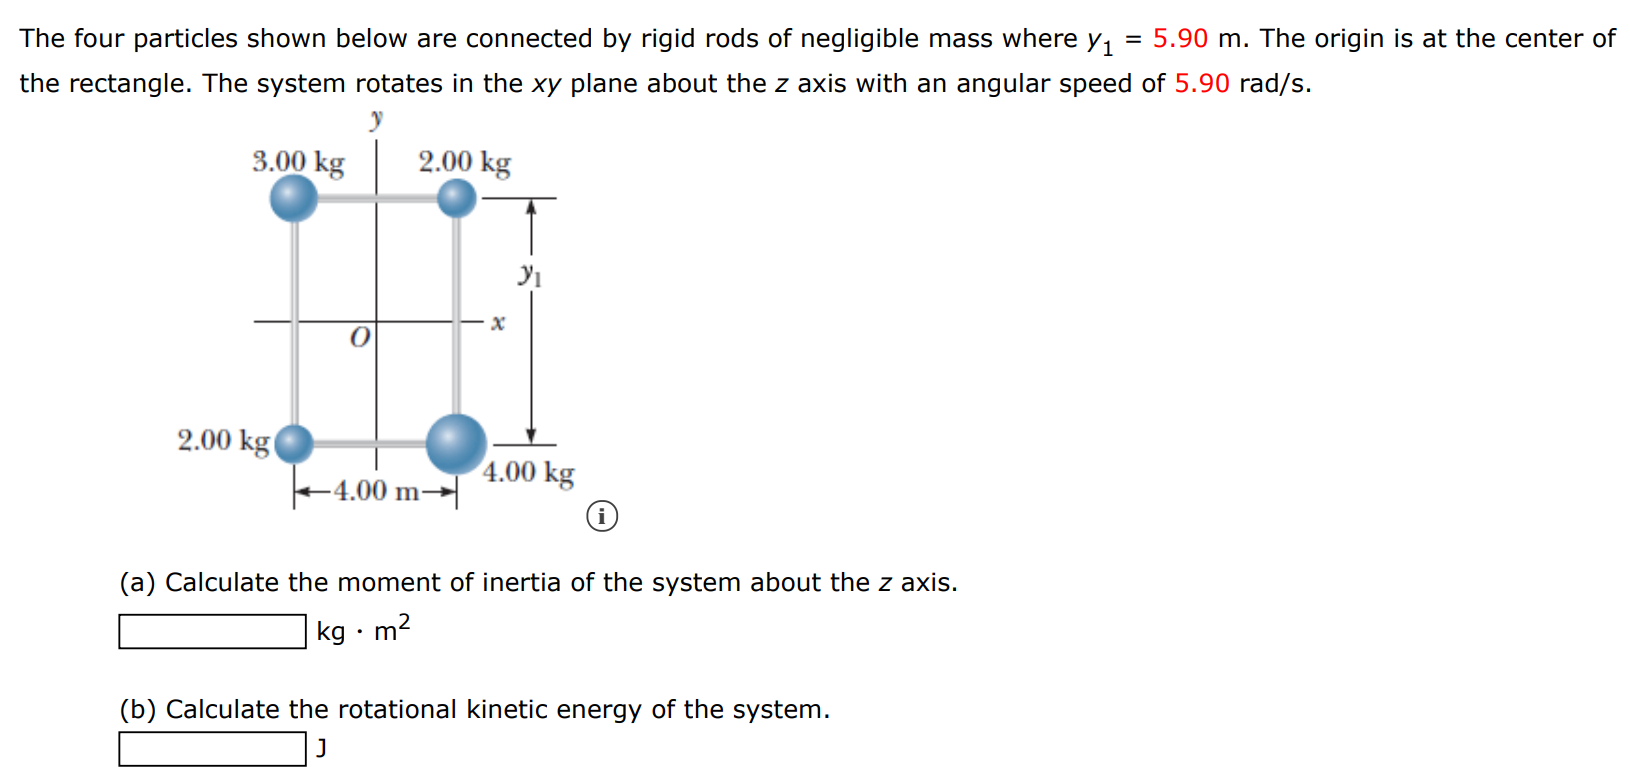 The four particles shown below are connected by rigid rods of negligible mass where y1 = 5.90 m. The origin is at the center of the rectangle. The system rotates in the xy plane about the z axis with an angular speed of 5.90 rad/s. (i) (a) Calculate the moment of inertia of the system about the z axis. kg⋅m2 (b) Calculate the rotational kinetic energy of the system. J 